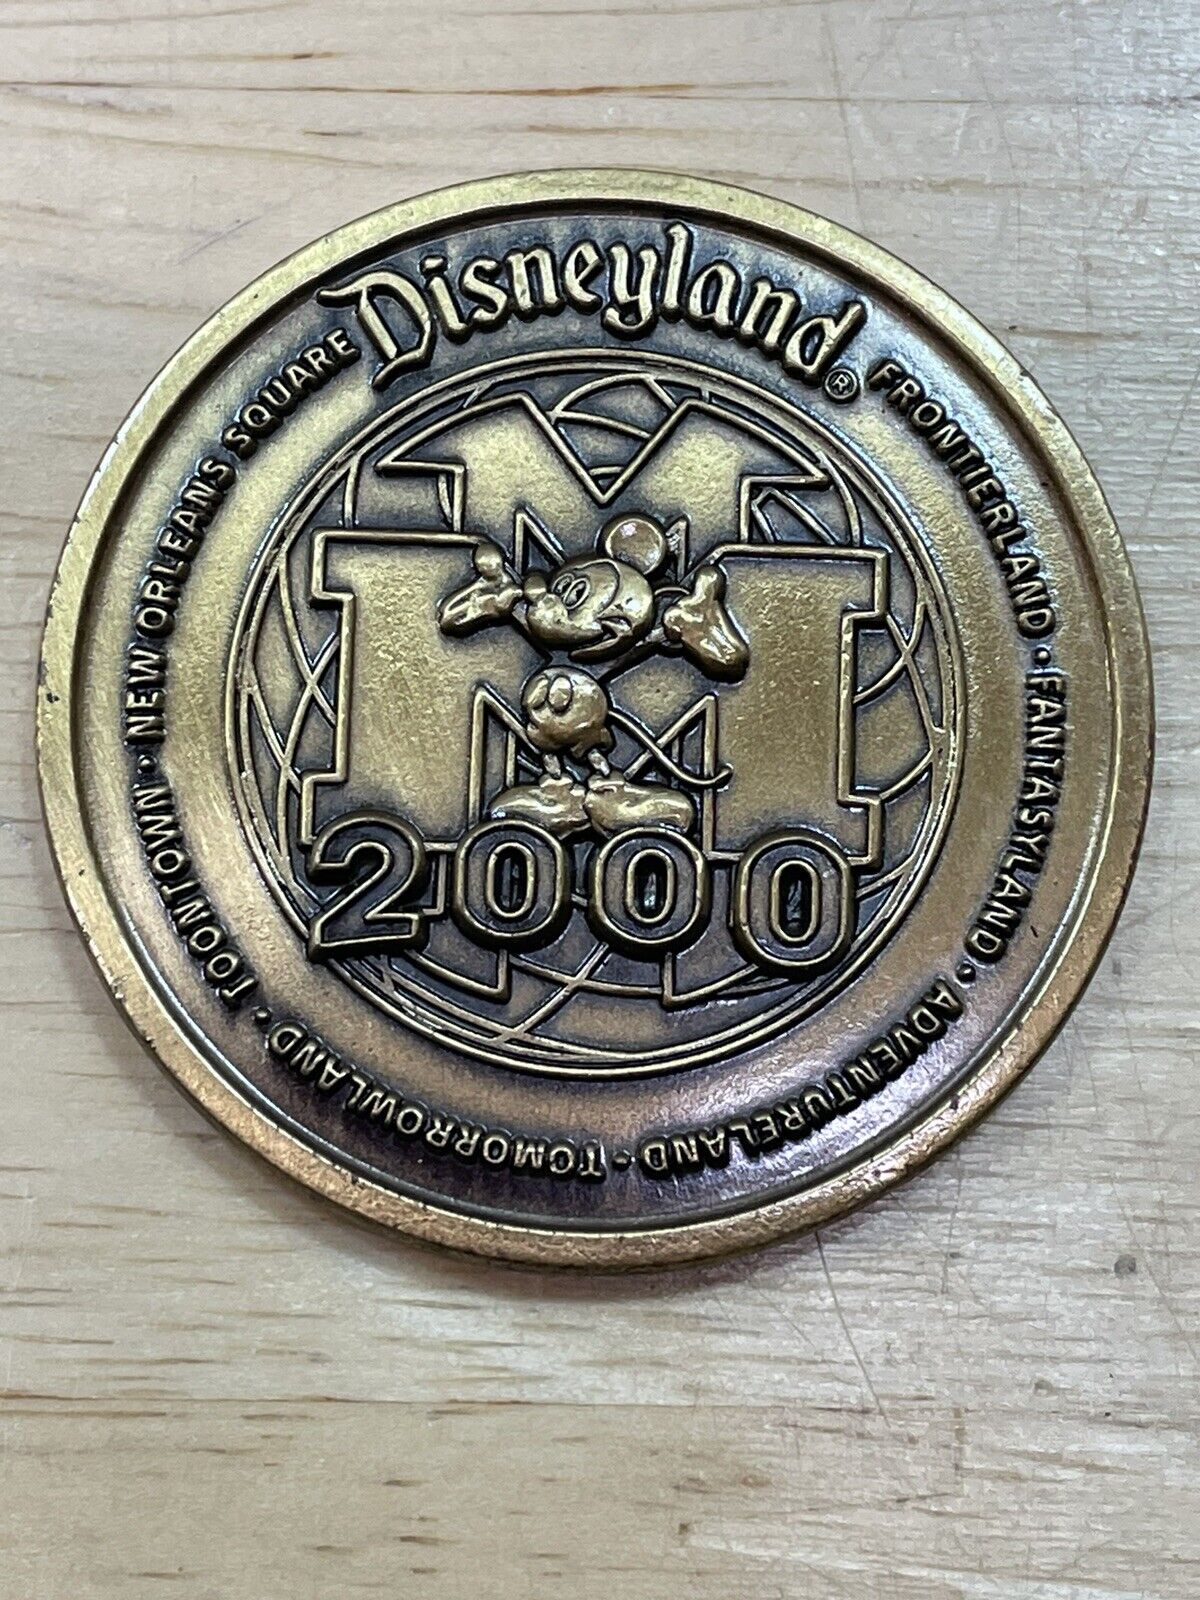 Disneyland Mickey Mouse 2000 Collectible  Commemorative Medallion Coin Bronze